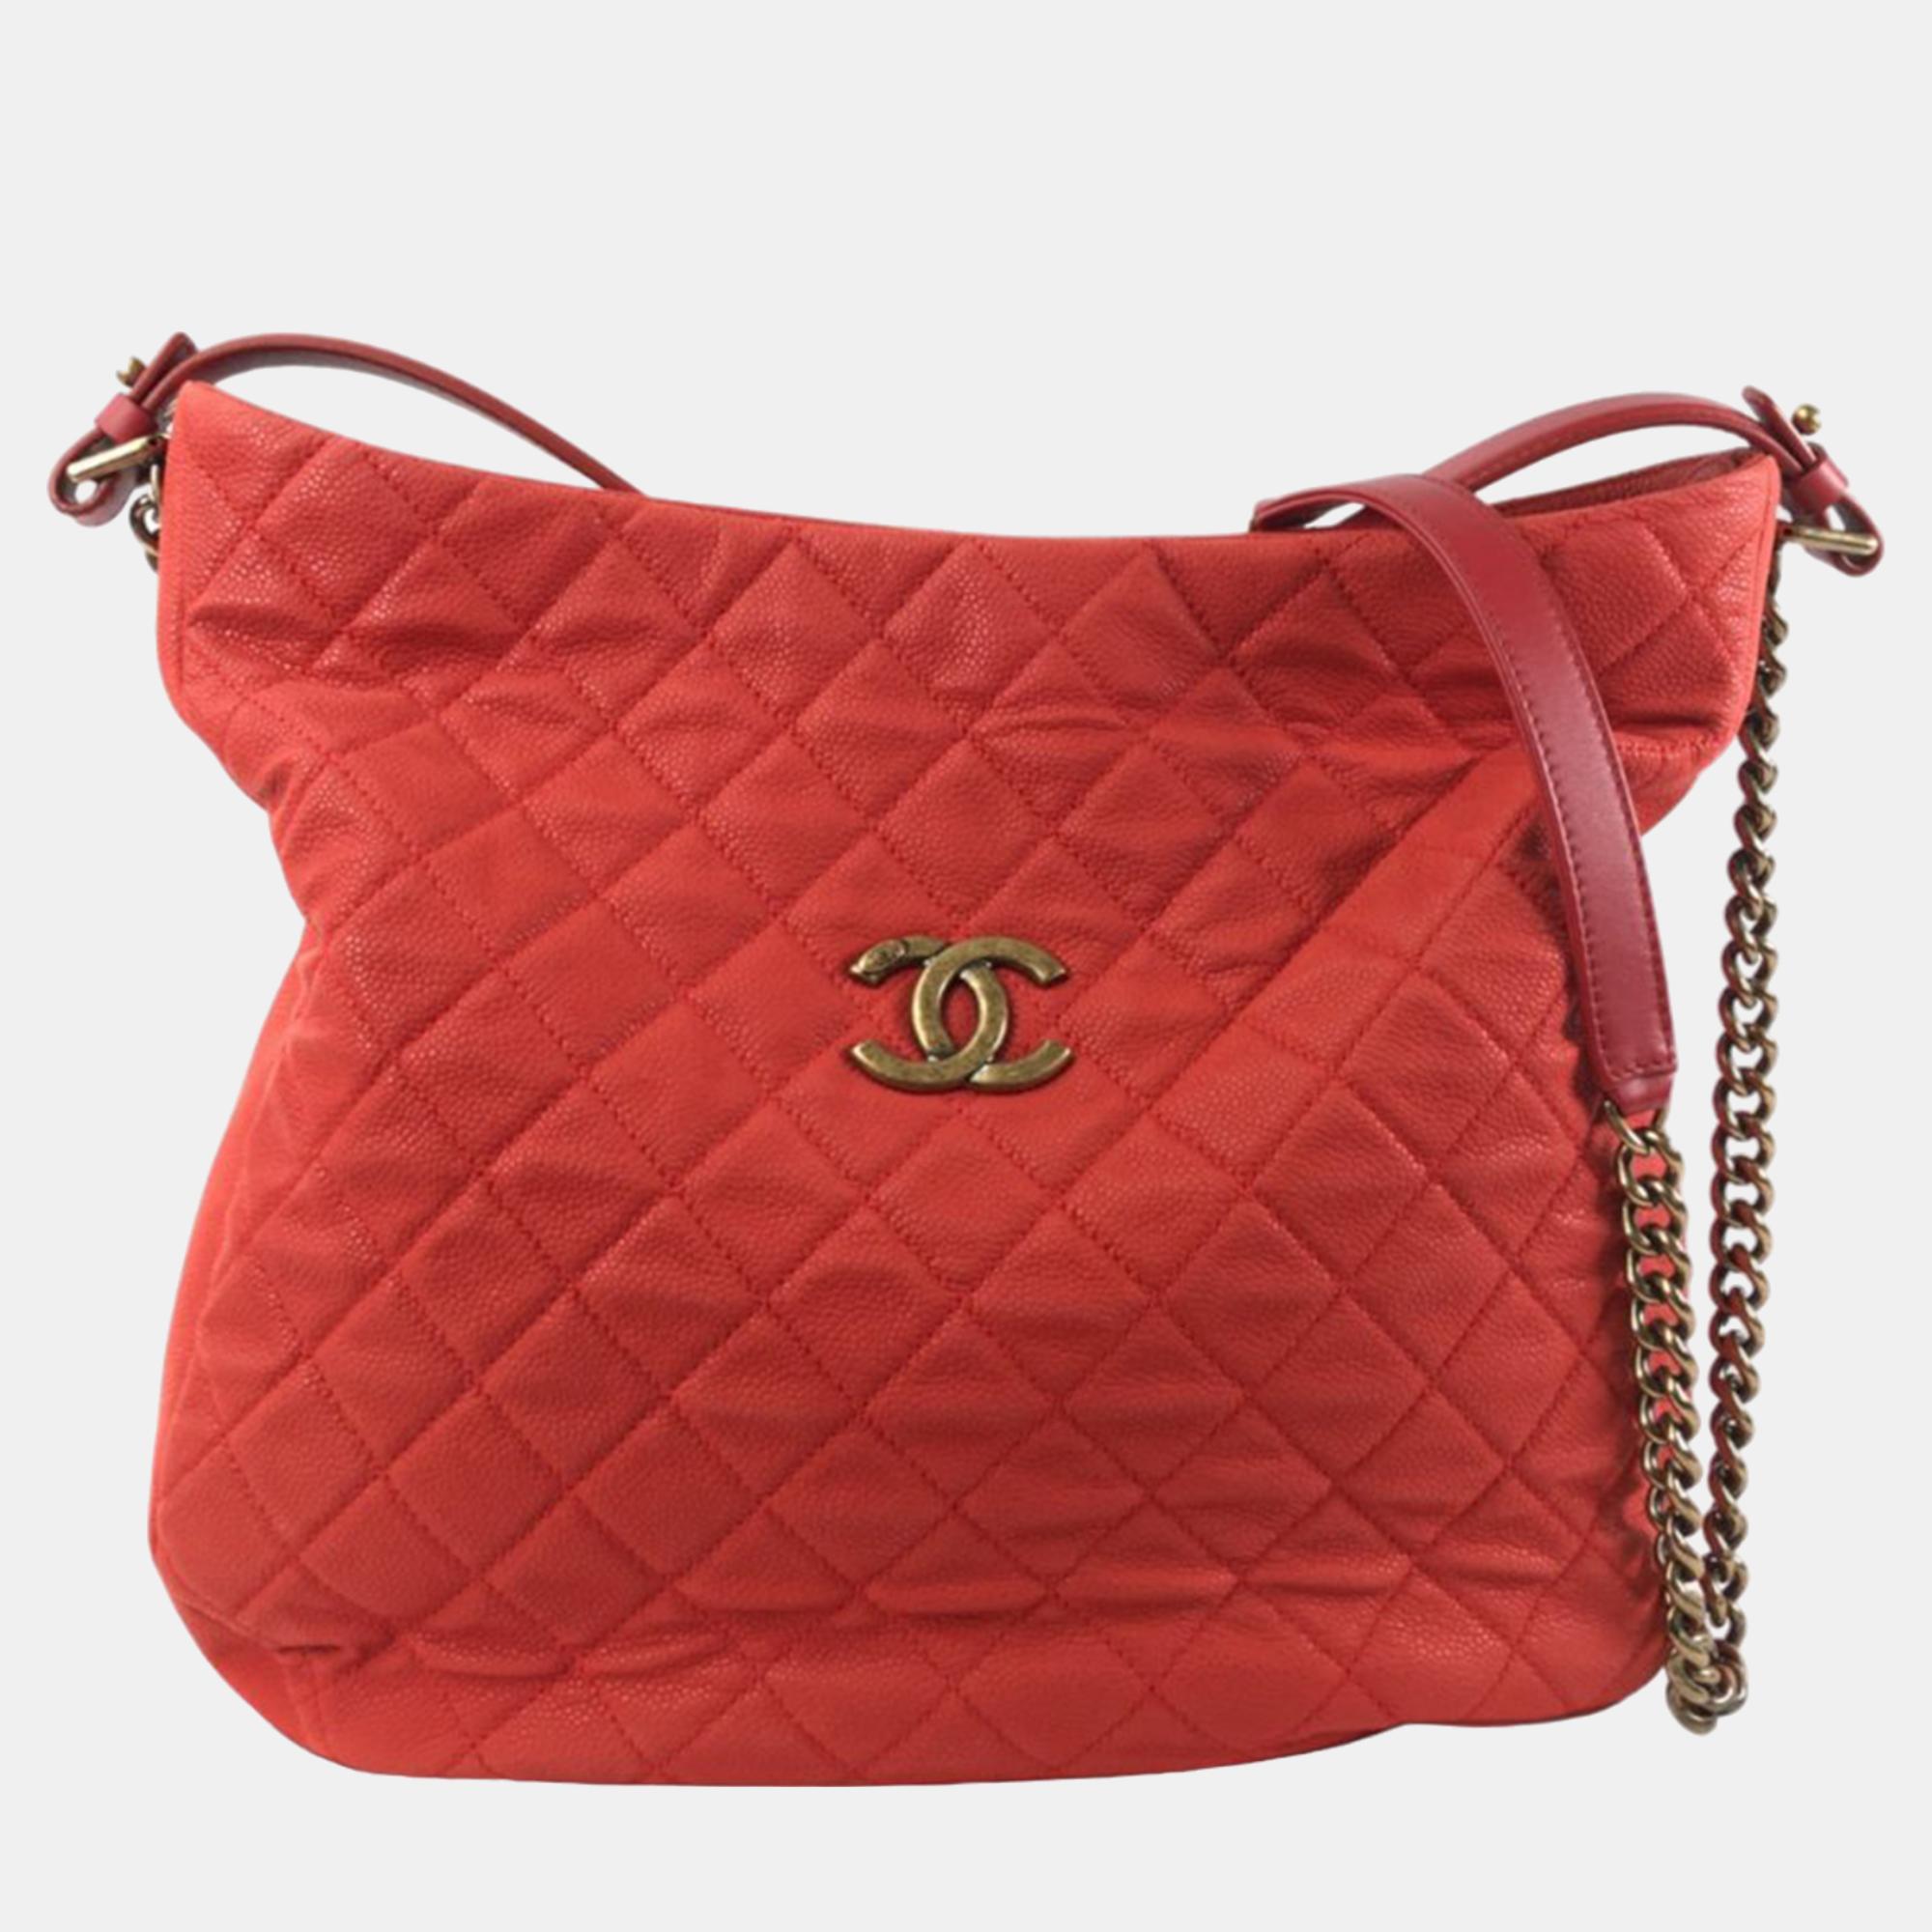 Chanel red caviar country chic hobo